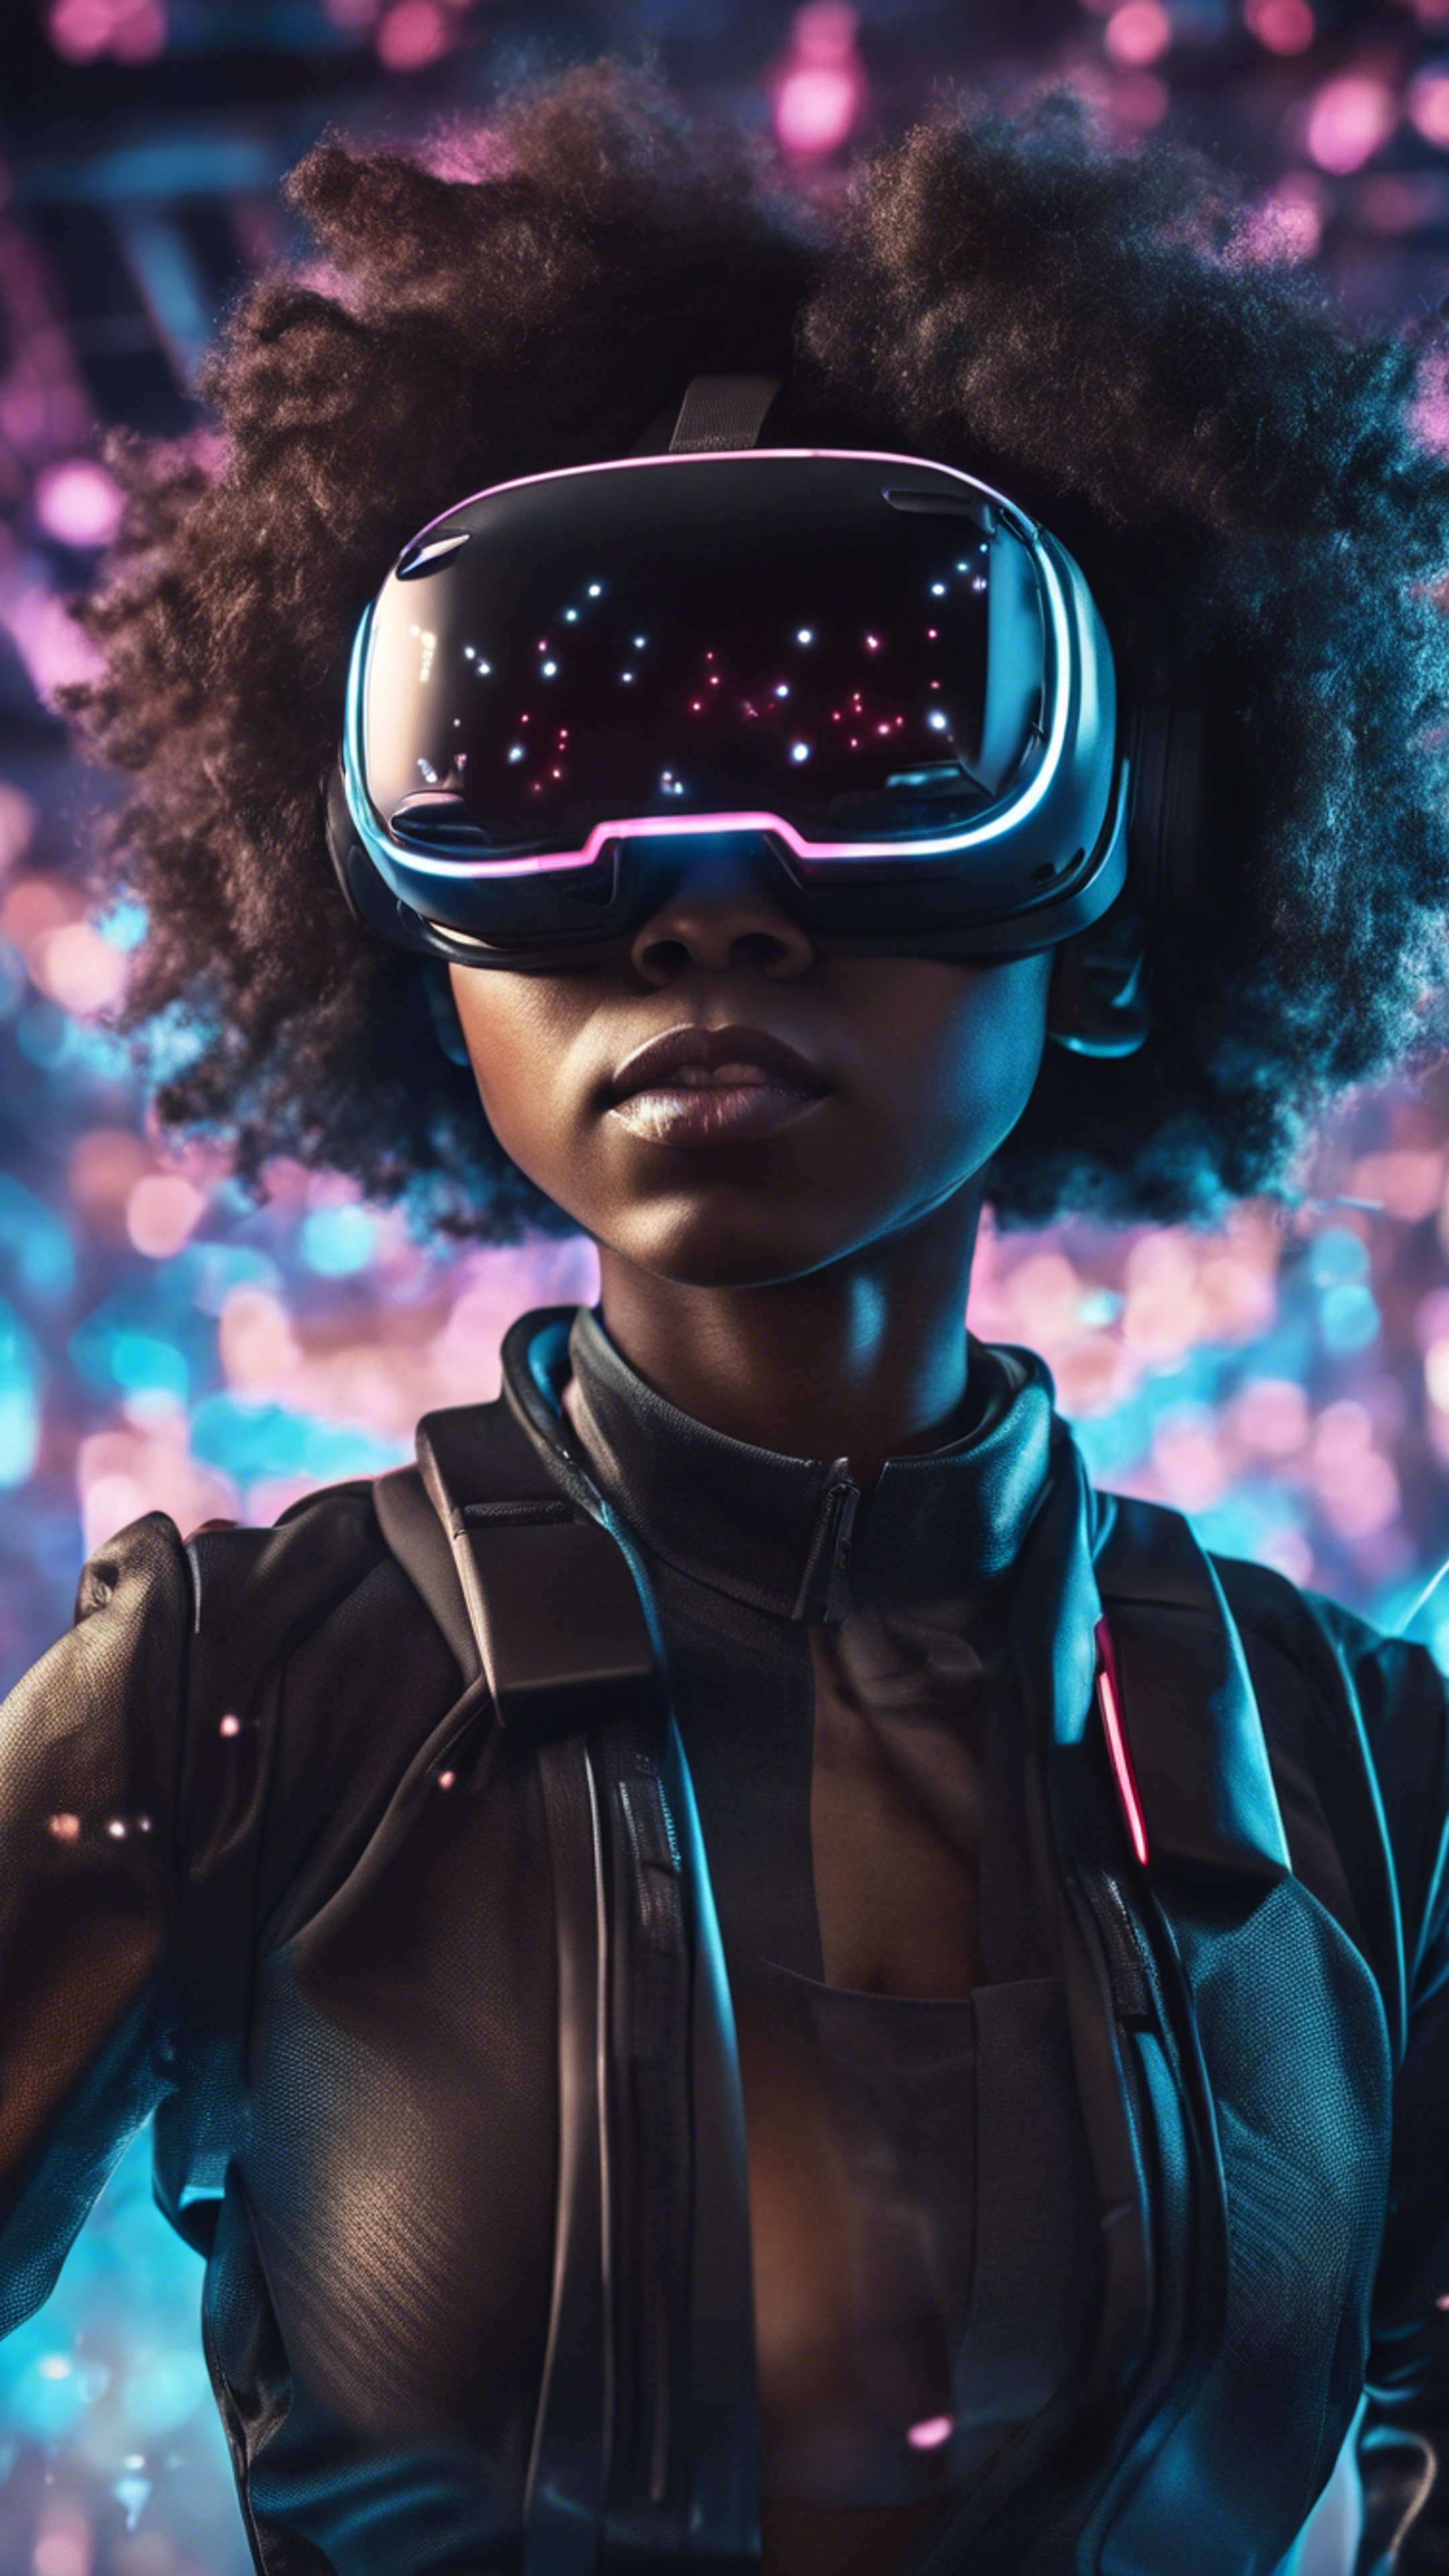 A black girl wearing a virtual reality headset completely immersed in a futuristic cyberspace. duvar kağıdı[0f80f55163a8478e8707]